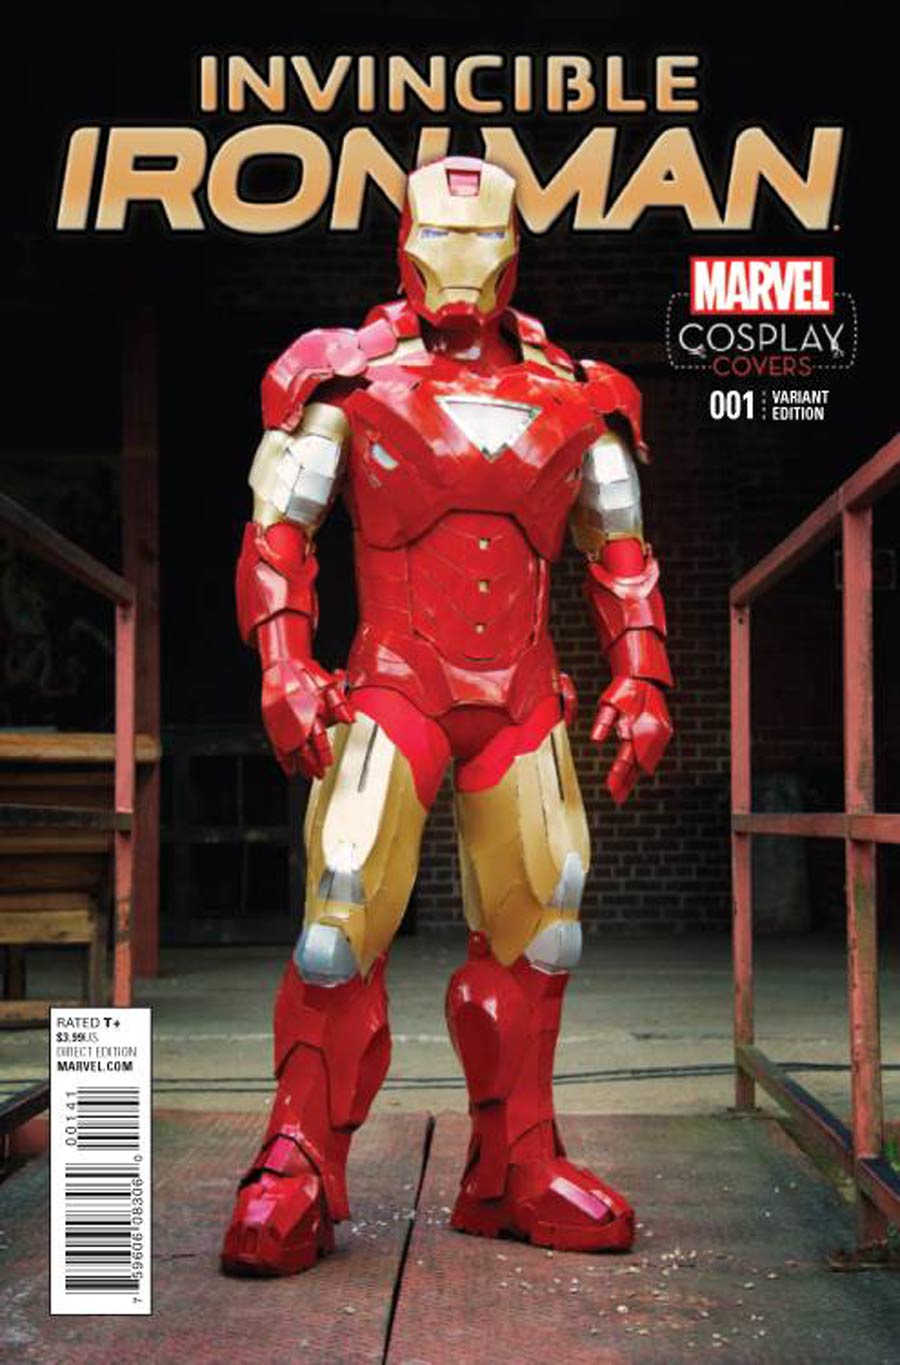 Invincible Iron Man Vol 2 #1 Cover N Incentive Cosplay Variant Cover